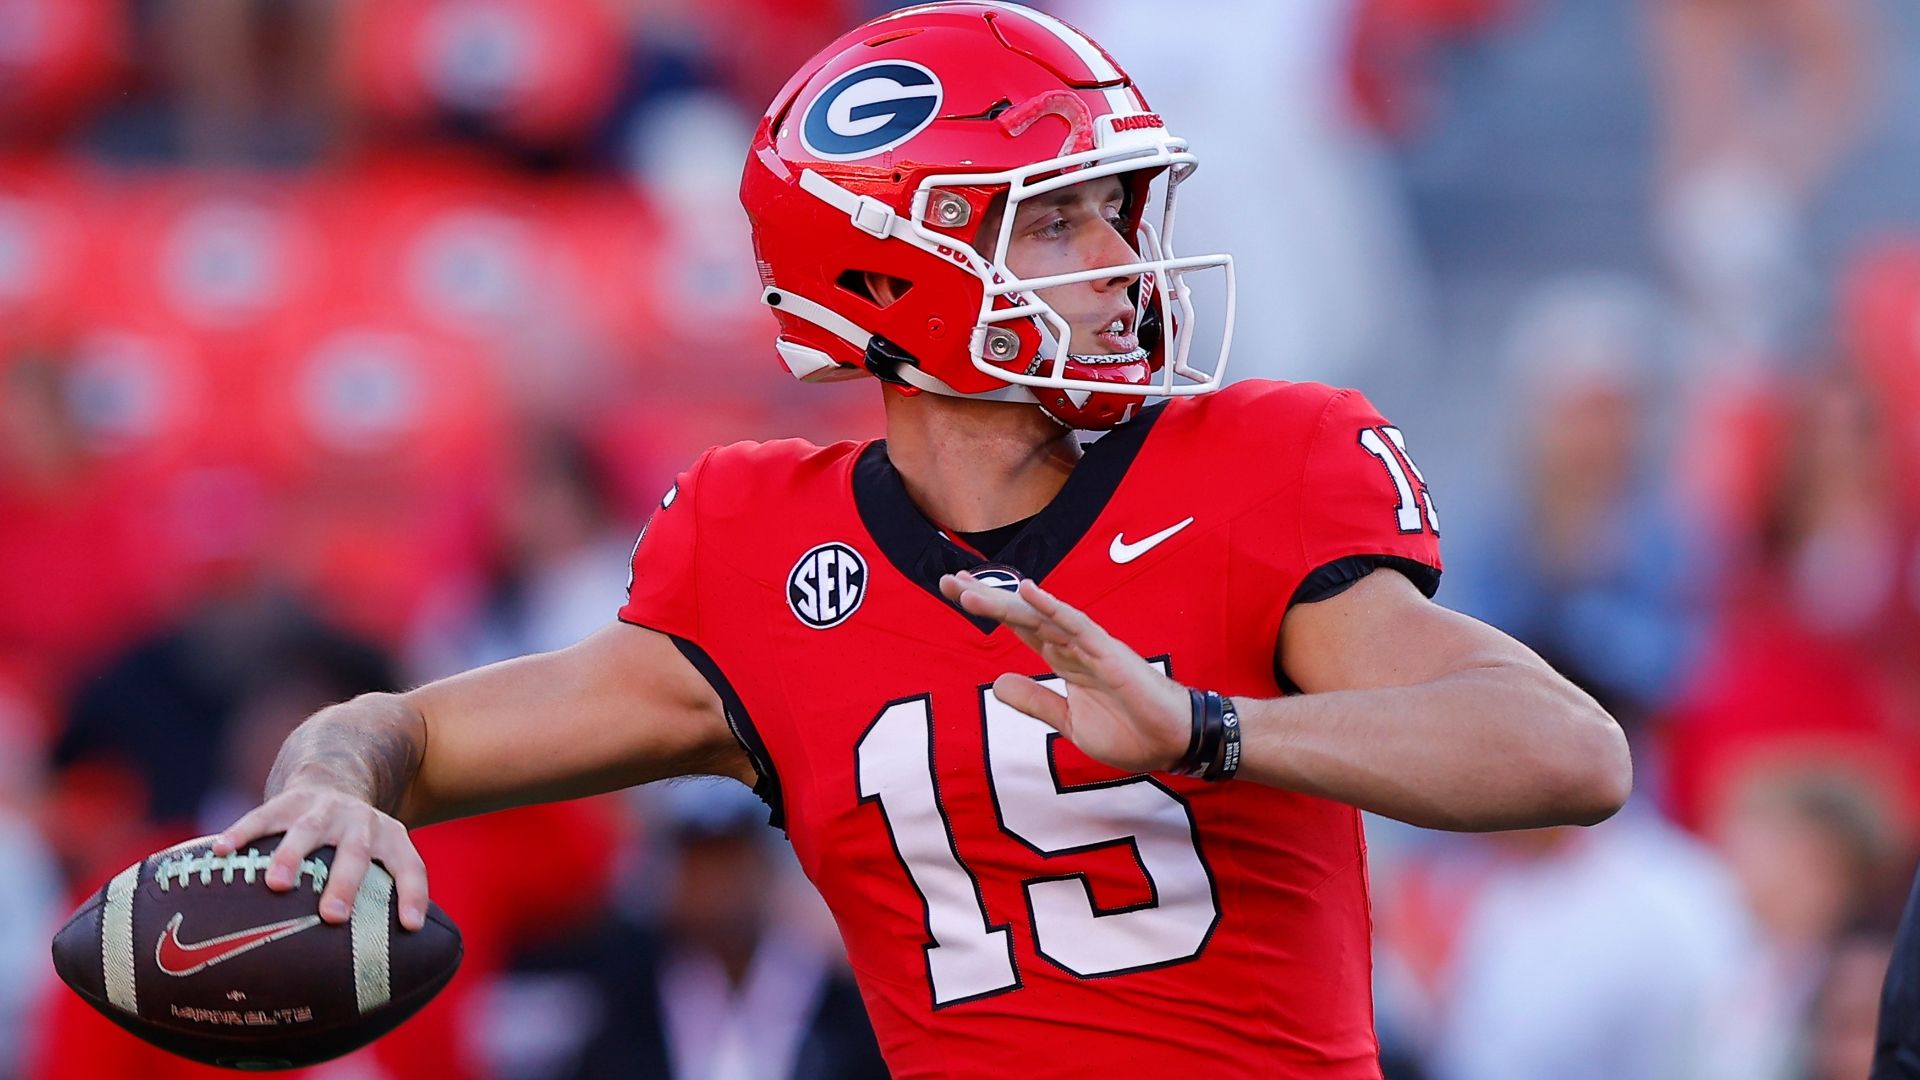 No. 1 Georgia finds fast start to rout No. 20 Wildcats